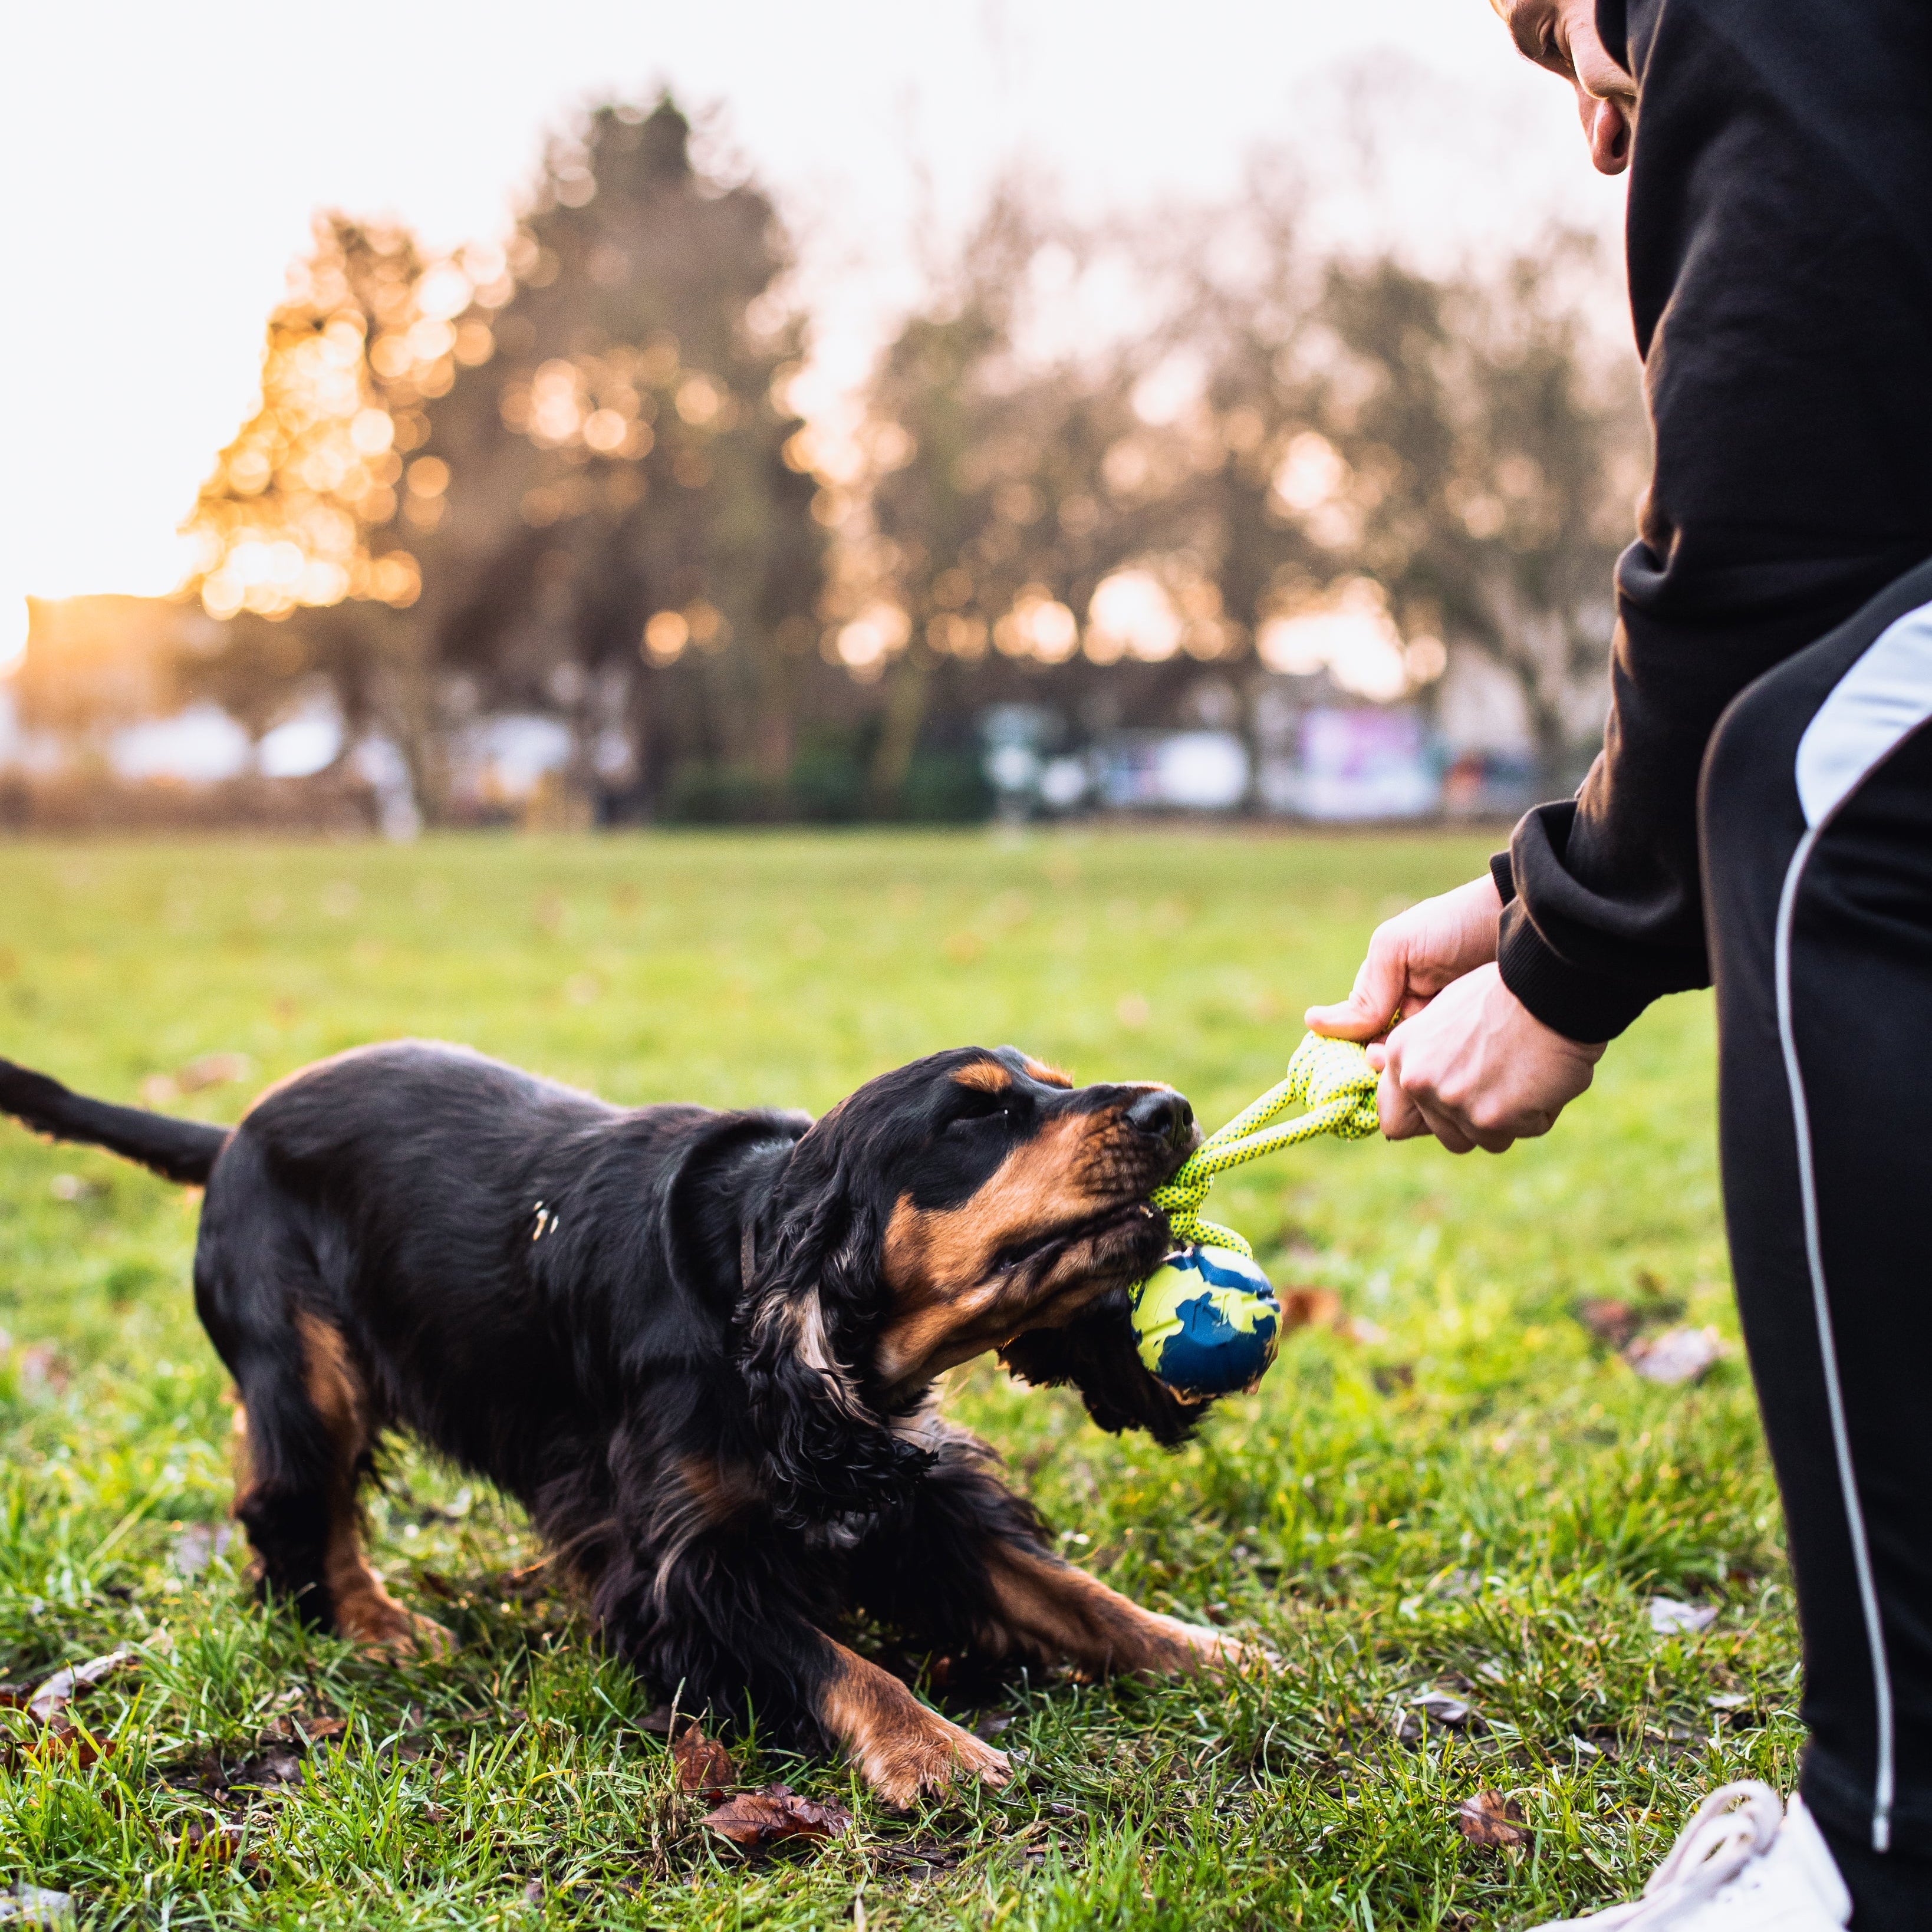 If you are a dog lover, playing with your dog is an important part of building a connection with your best friend! The ball is made from natural rubber, which is non-toxic and very durable. Our Loopo dog toy is great for underhand throwing (so you do not strain your shoulder) and fetching with your dog.